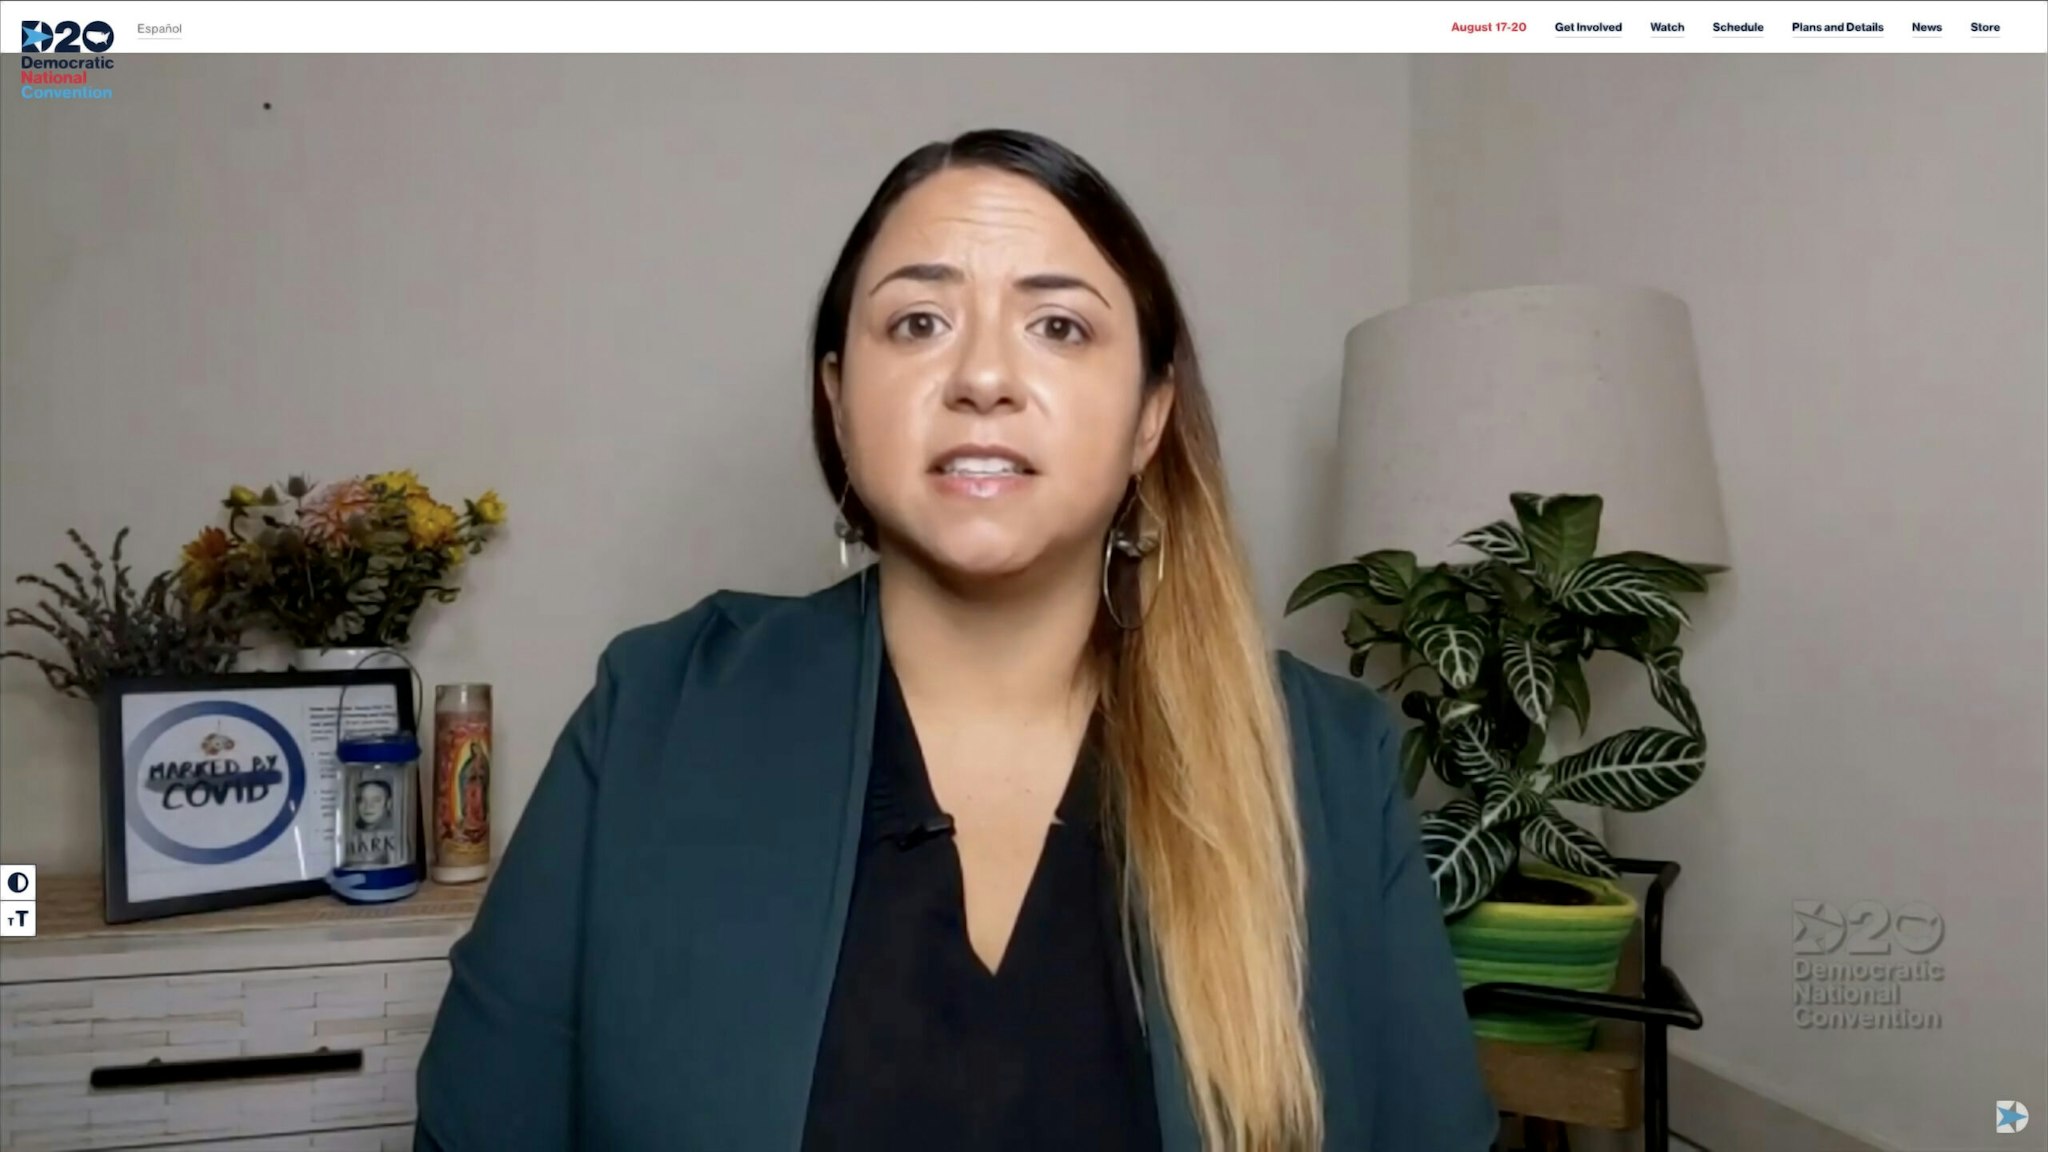 In this screenshot from the DNCC’s livestream of the 2020 Democratic National Convention, Kristin Urquiza, whose father died of coronavirus, addresses the virtual convention on August 17, 2020. The convention, which was once expected to draw 50,000 people to Milwaukee, Wisconsin, is now taking place virtually due to the coronavirus pandemic.